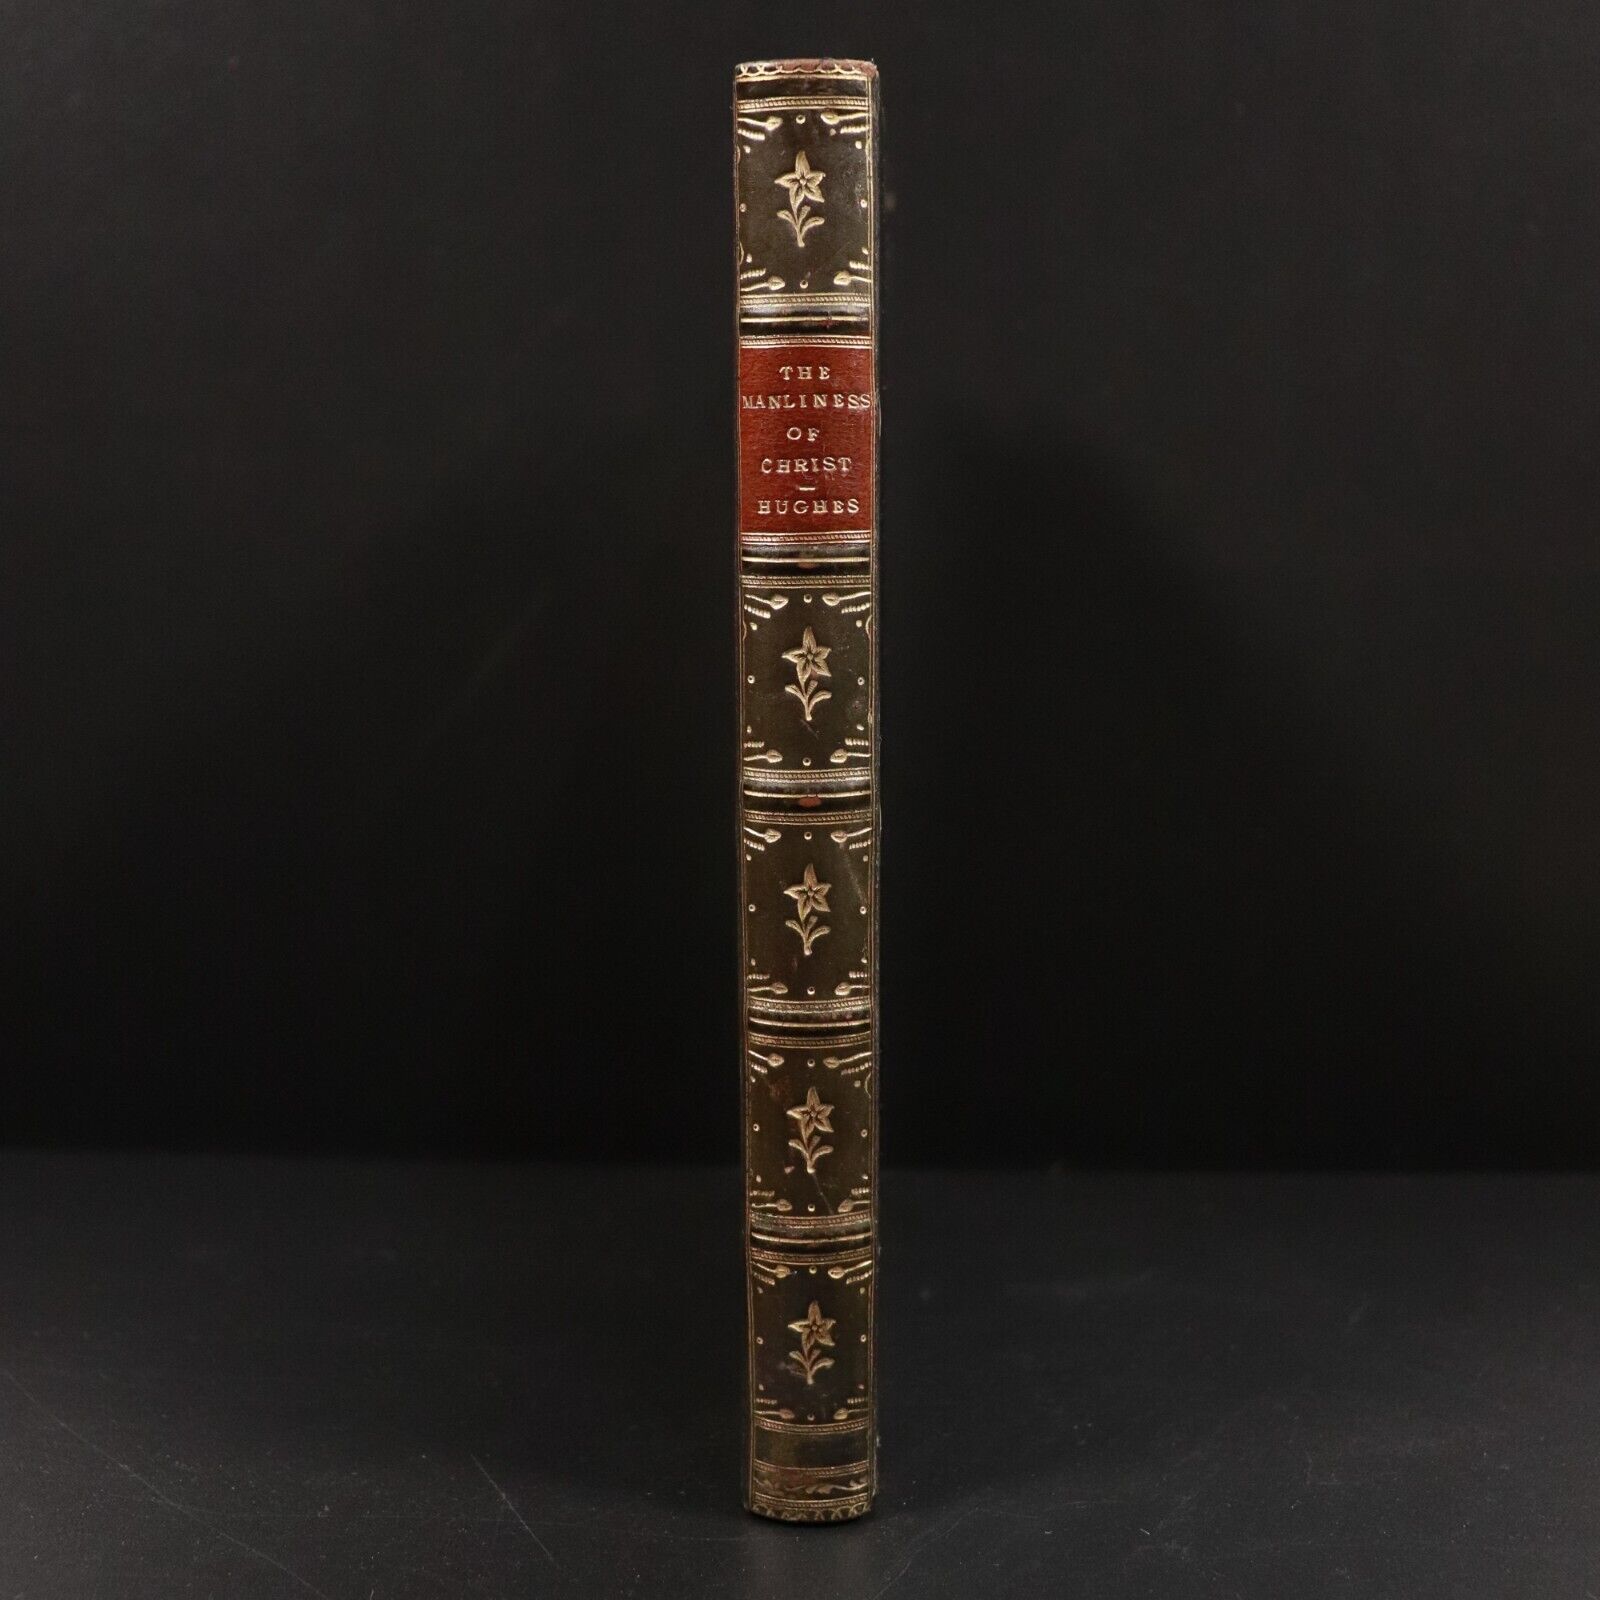 1880 The Manliness Of Christ by Thomas Hughes Antiquarian Theology Book